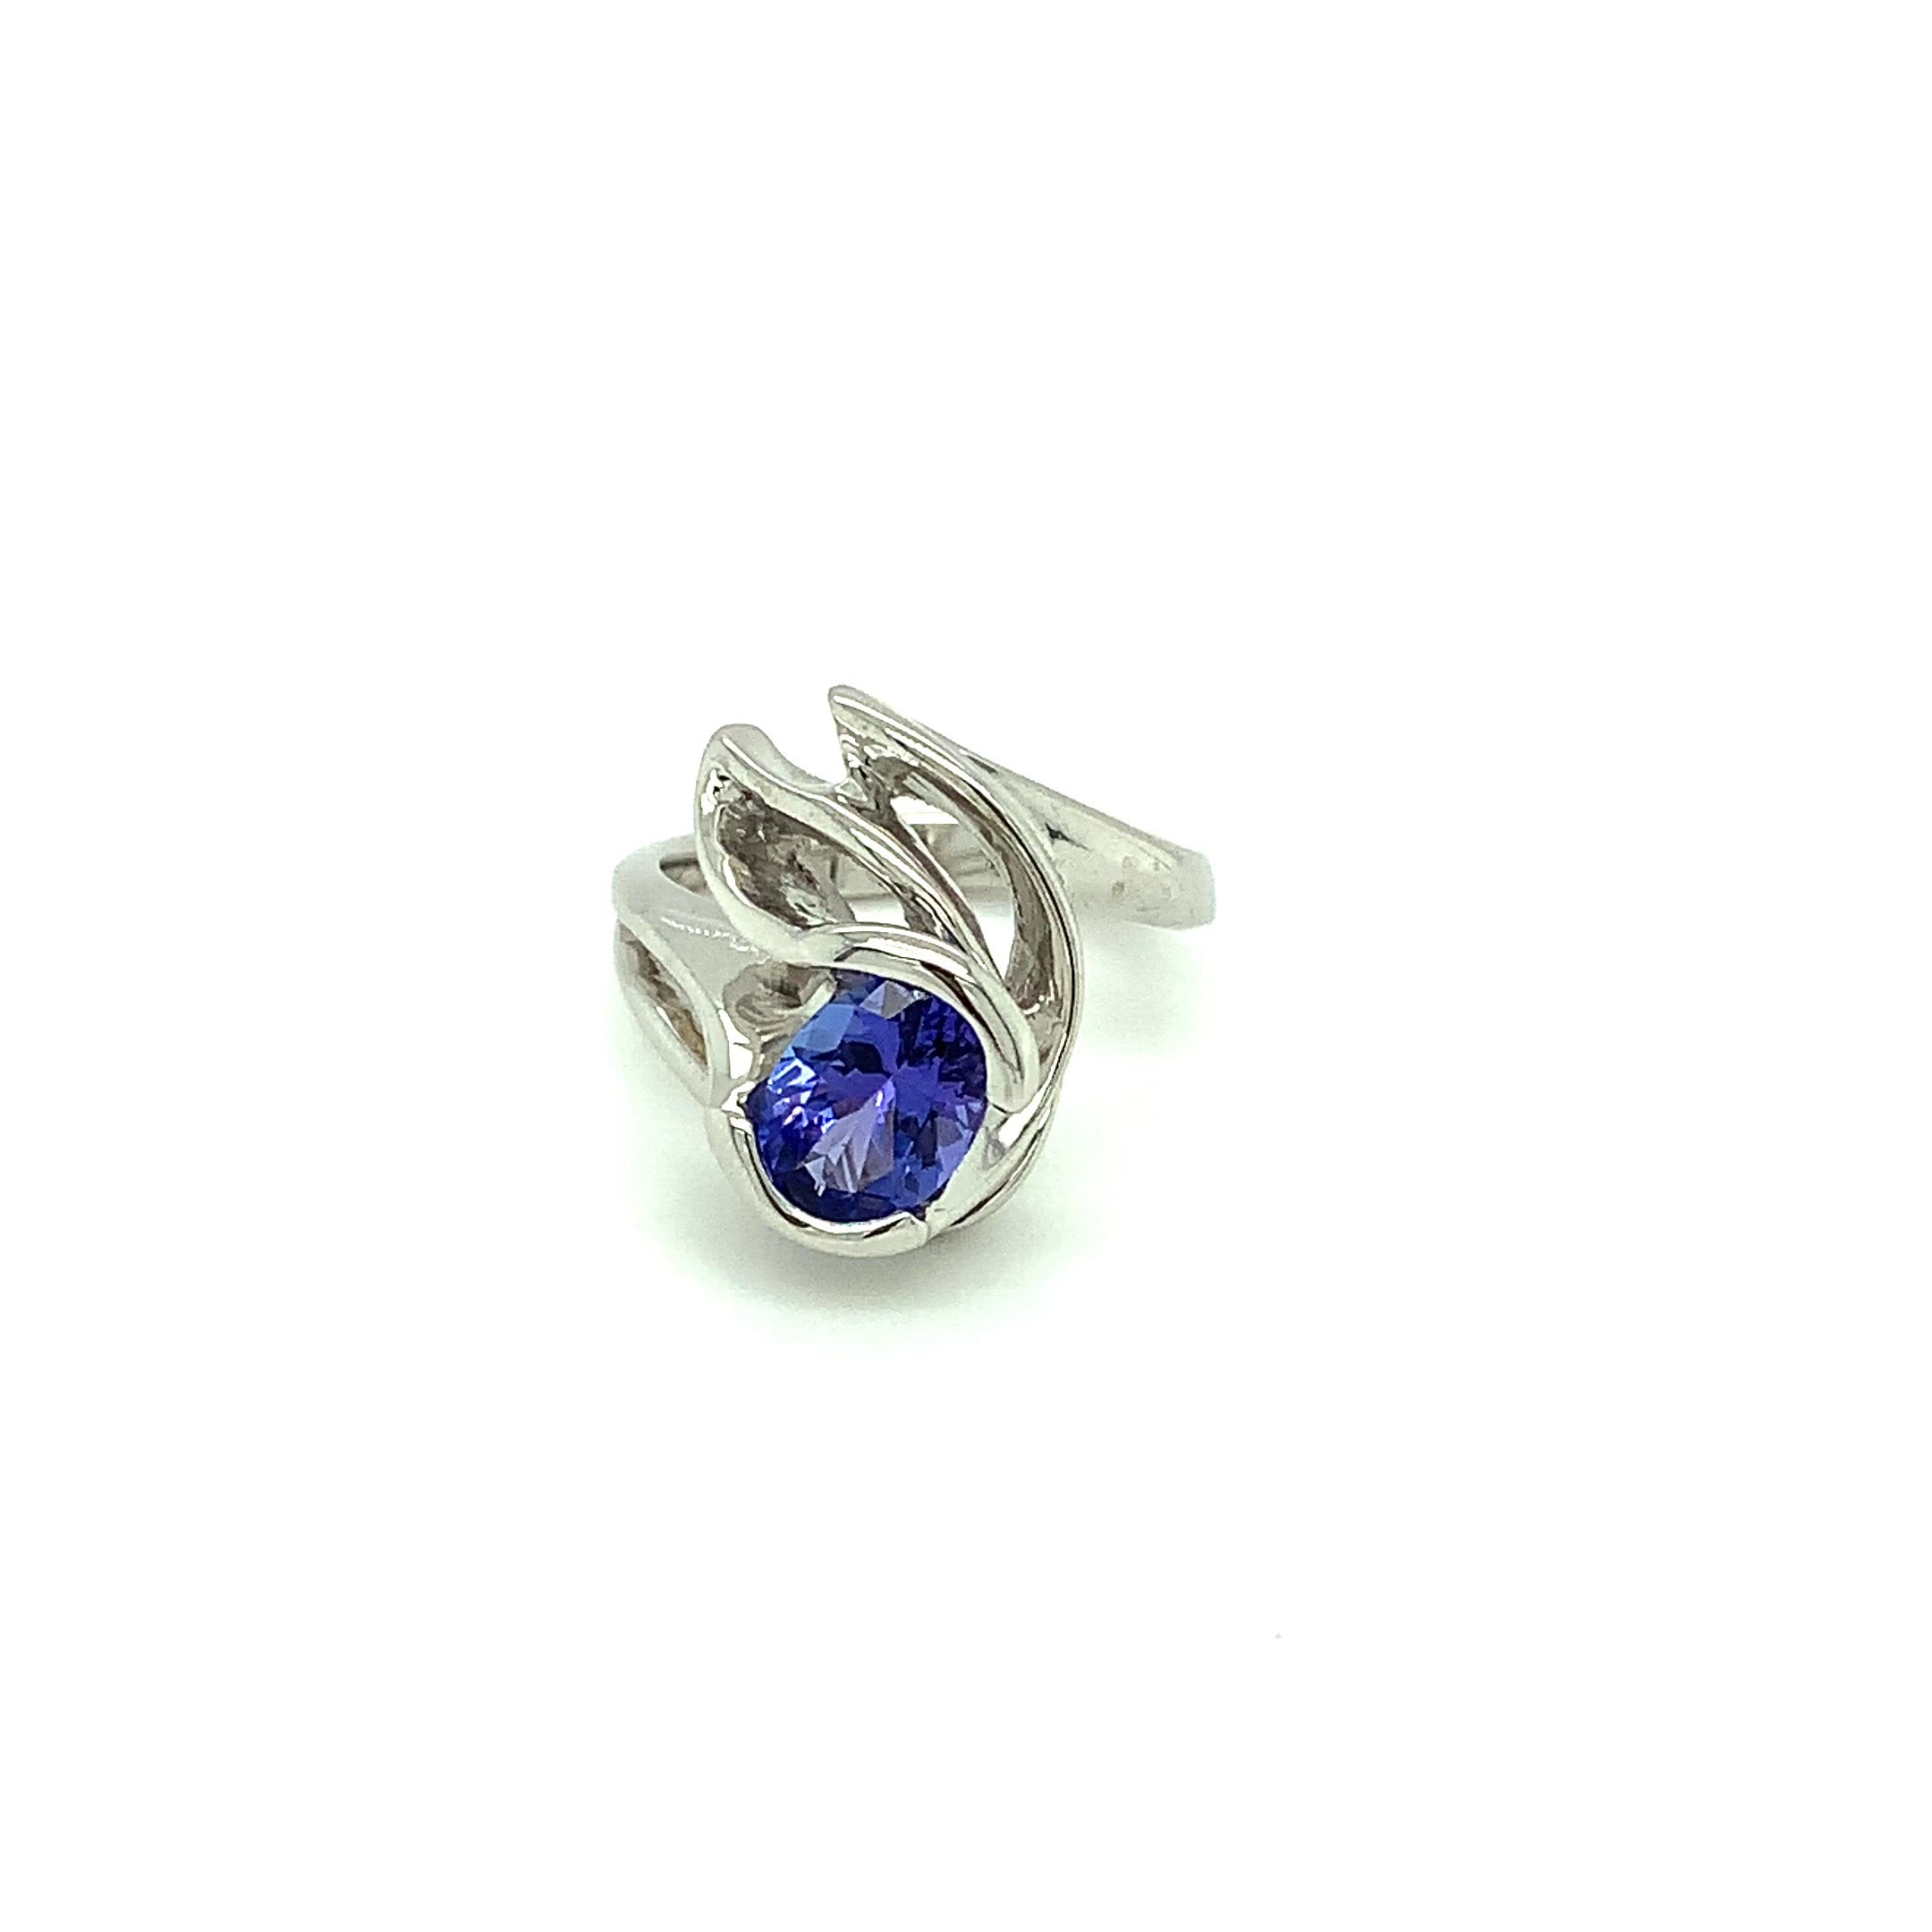 GIA Certified Natural D'Block Tanzanite Ring 14K Solid White Gold 1.33ct Solitaire Ring Statement Ring Cocktail Ring Estate Jewelry December